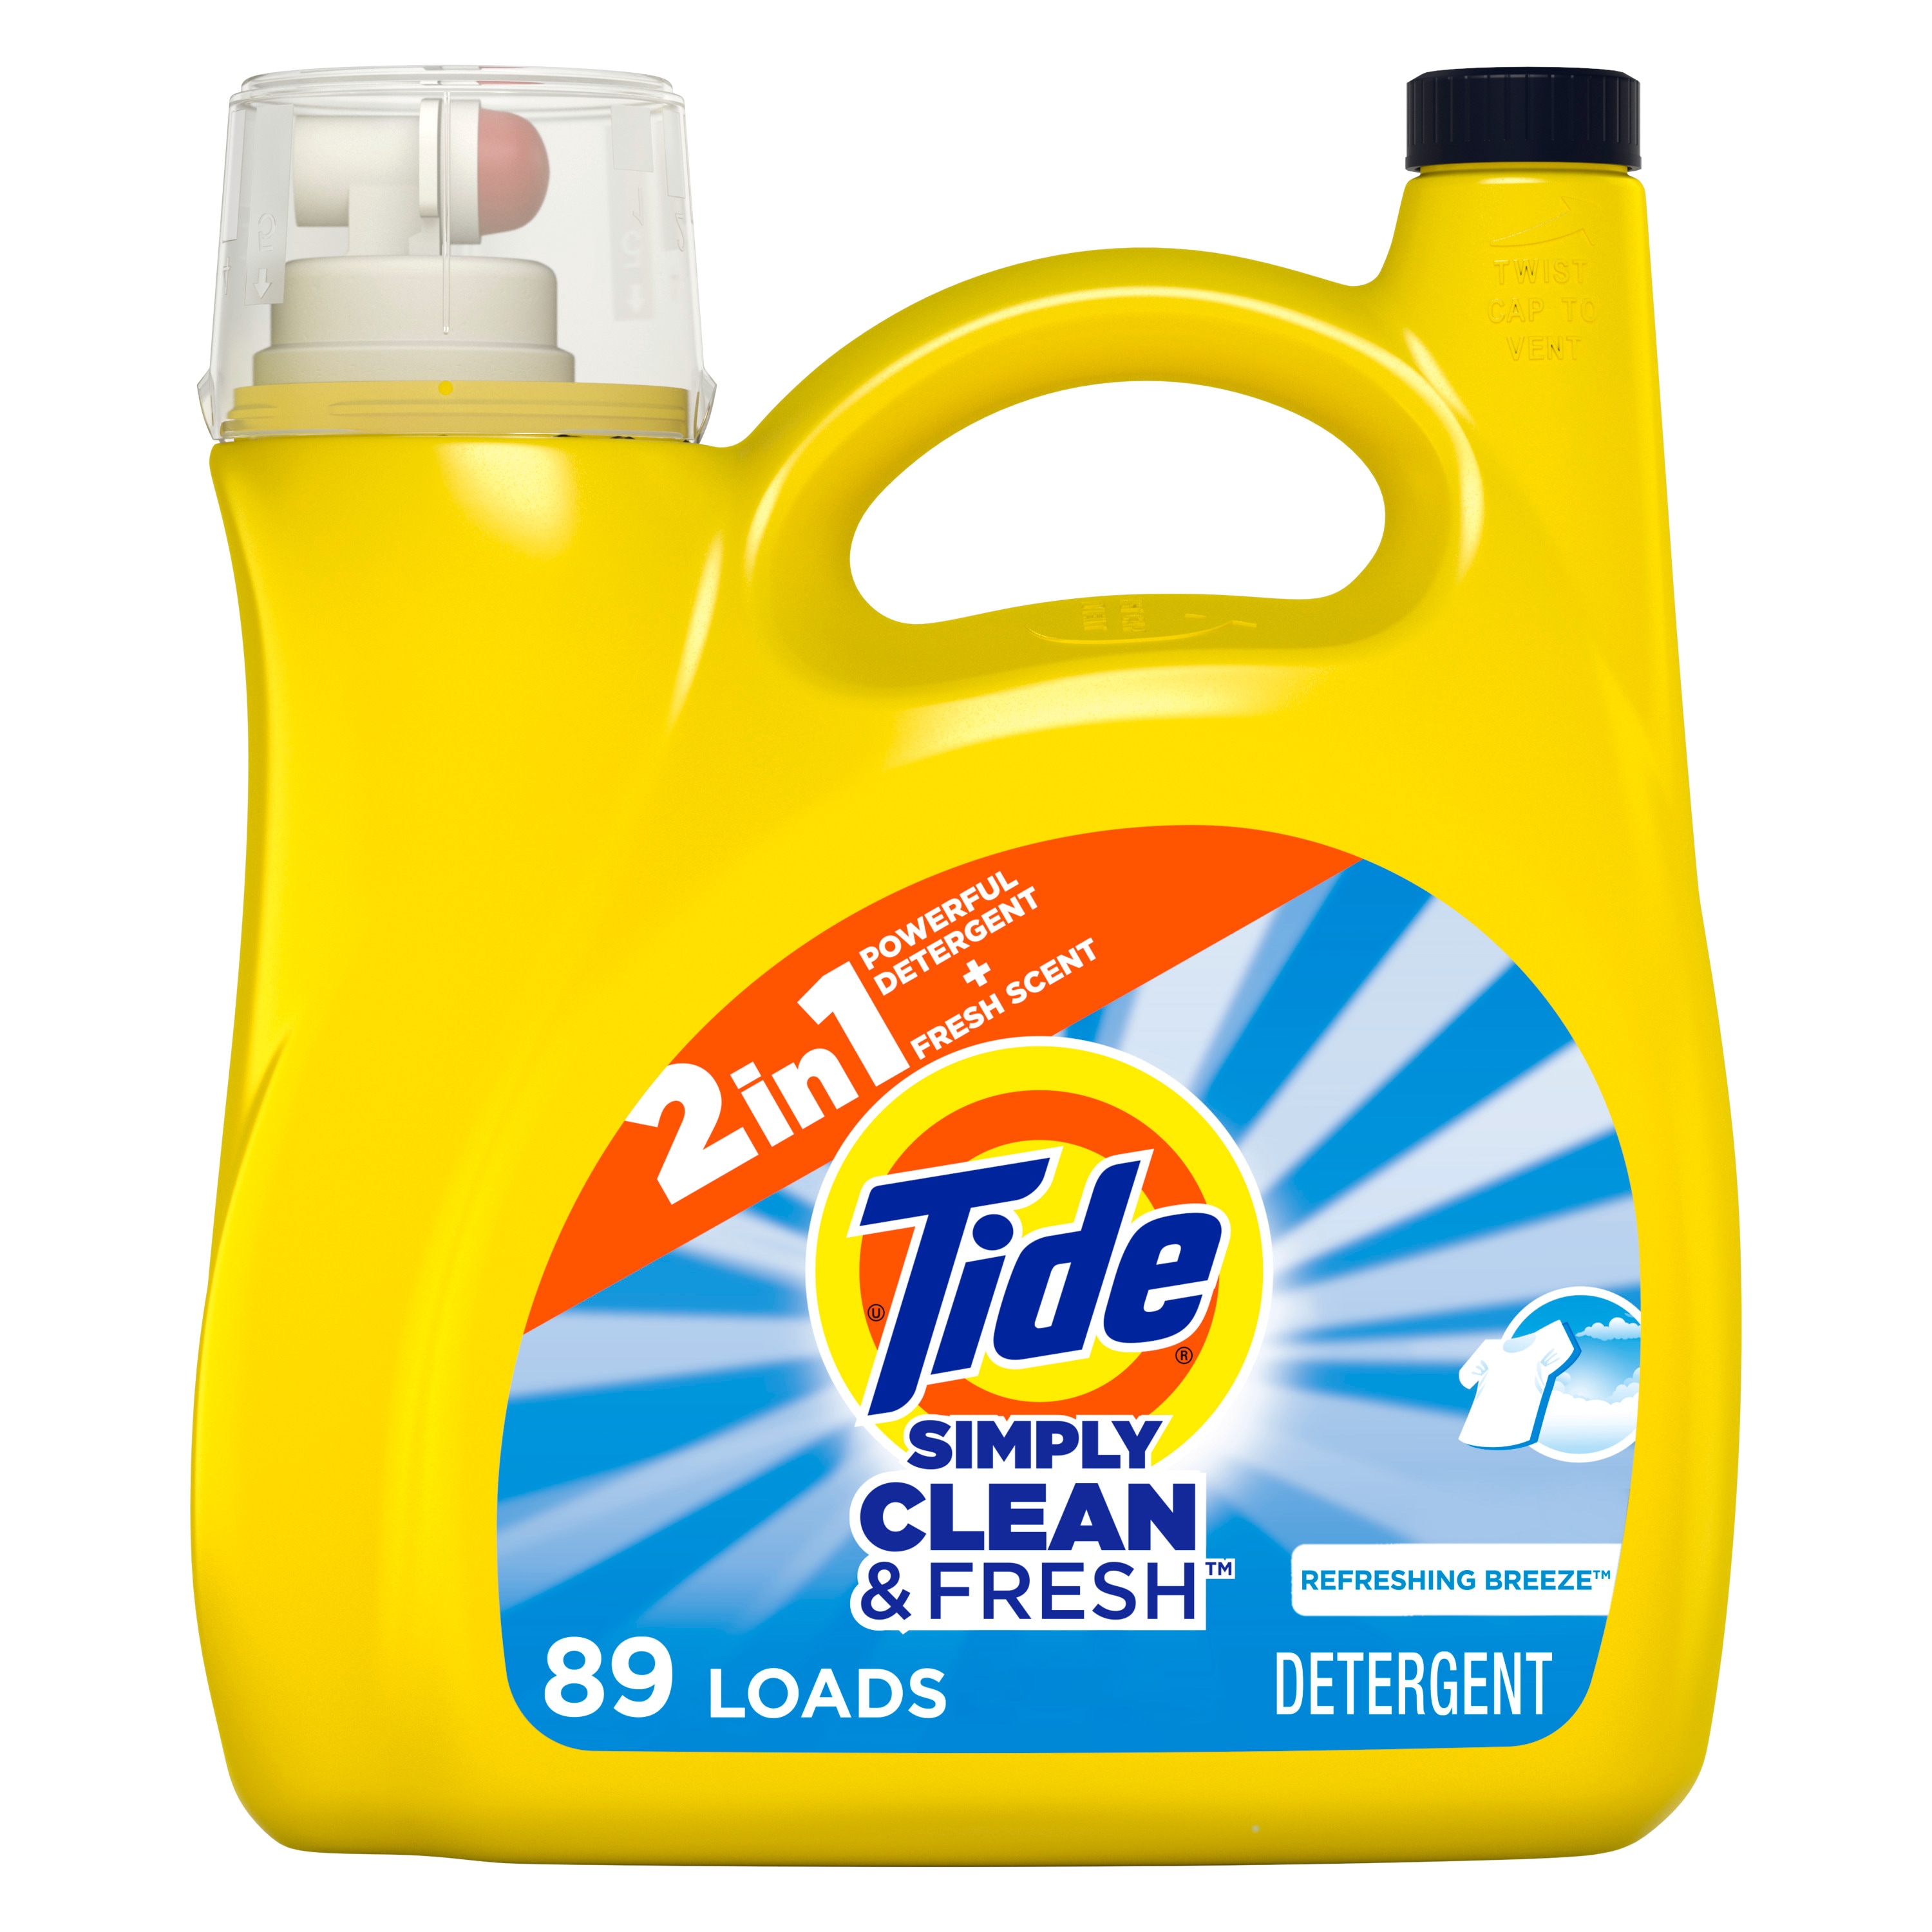 Laundry Detergent at Lowes.com